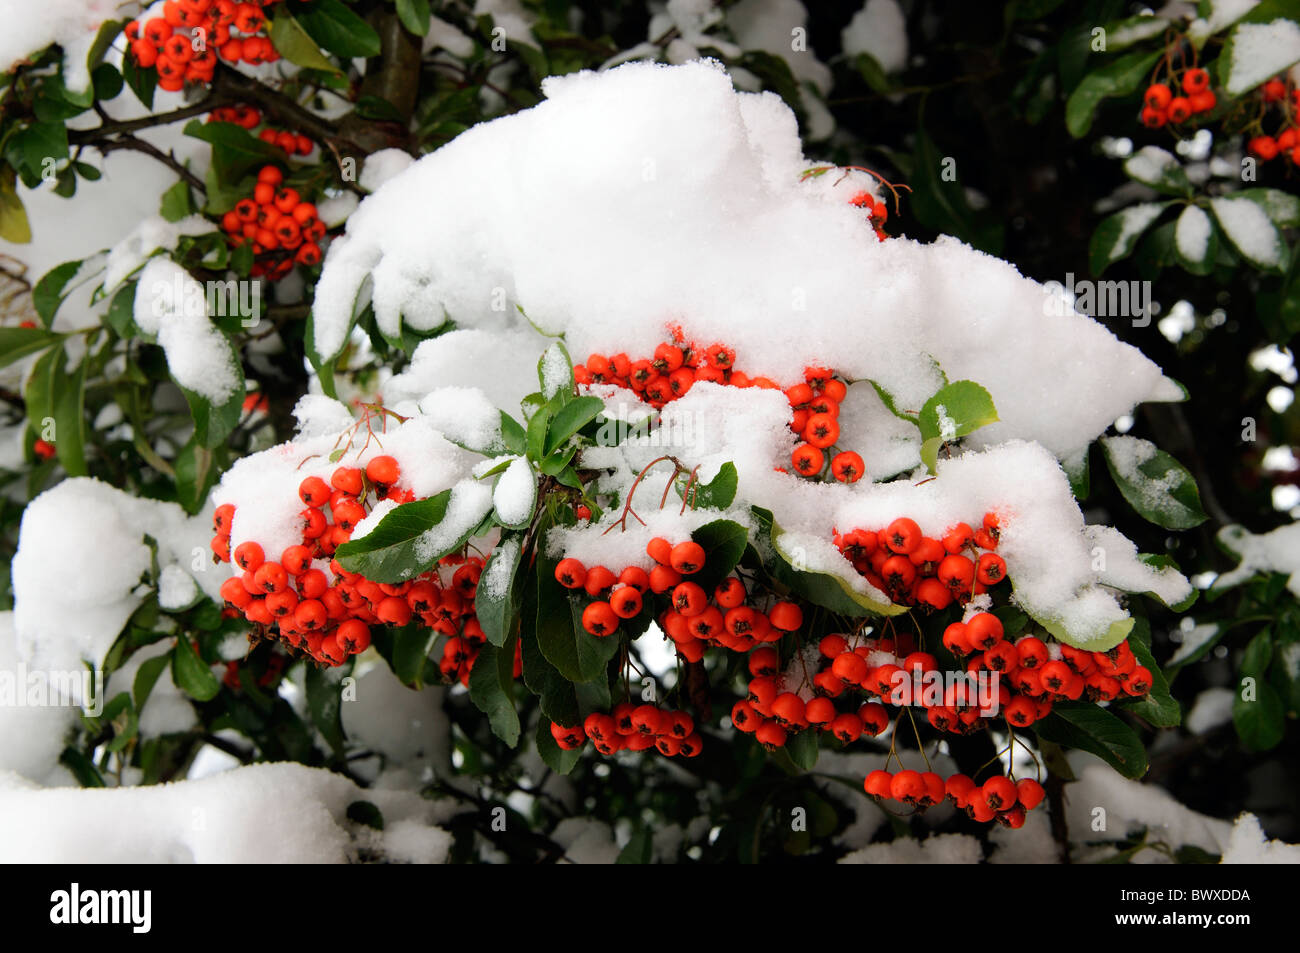 Red berries covered in snow on a Pyracantha Firethorn shrub Stock Photo